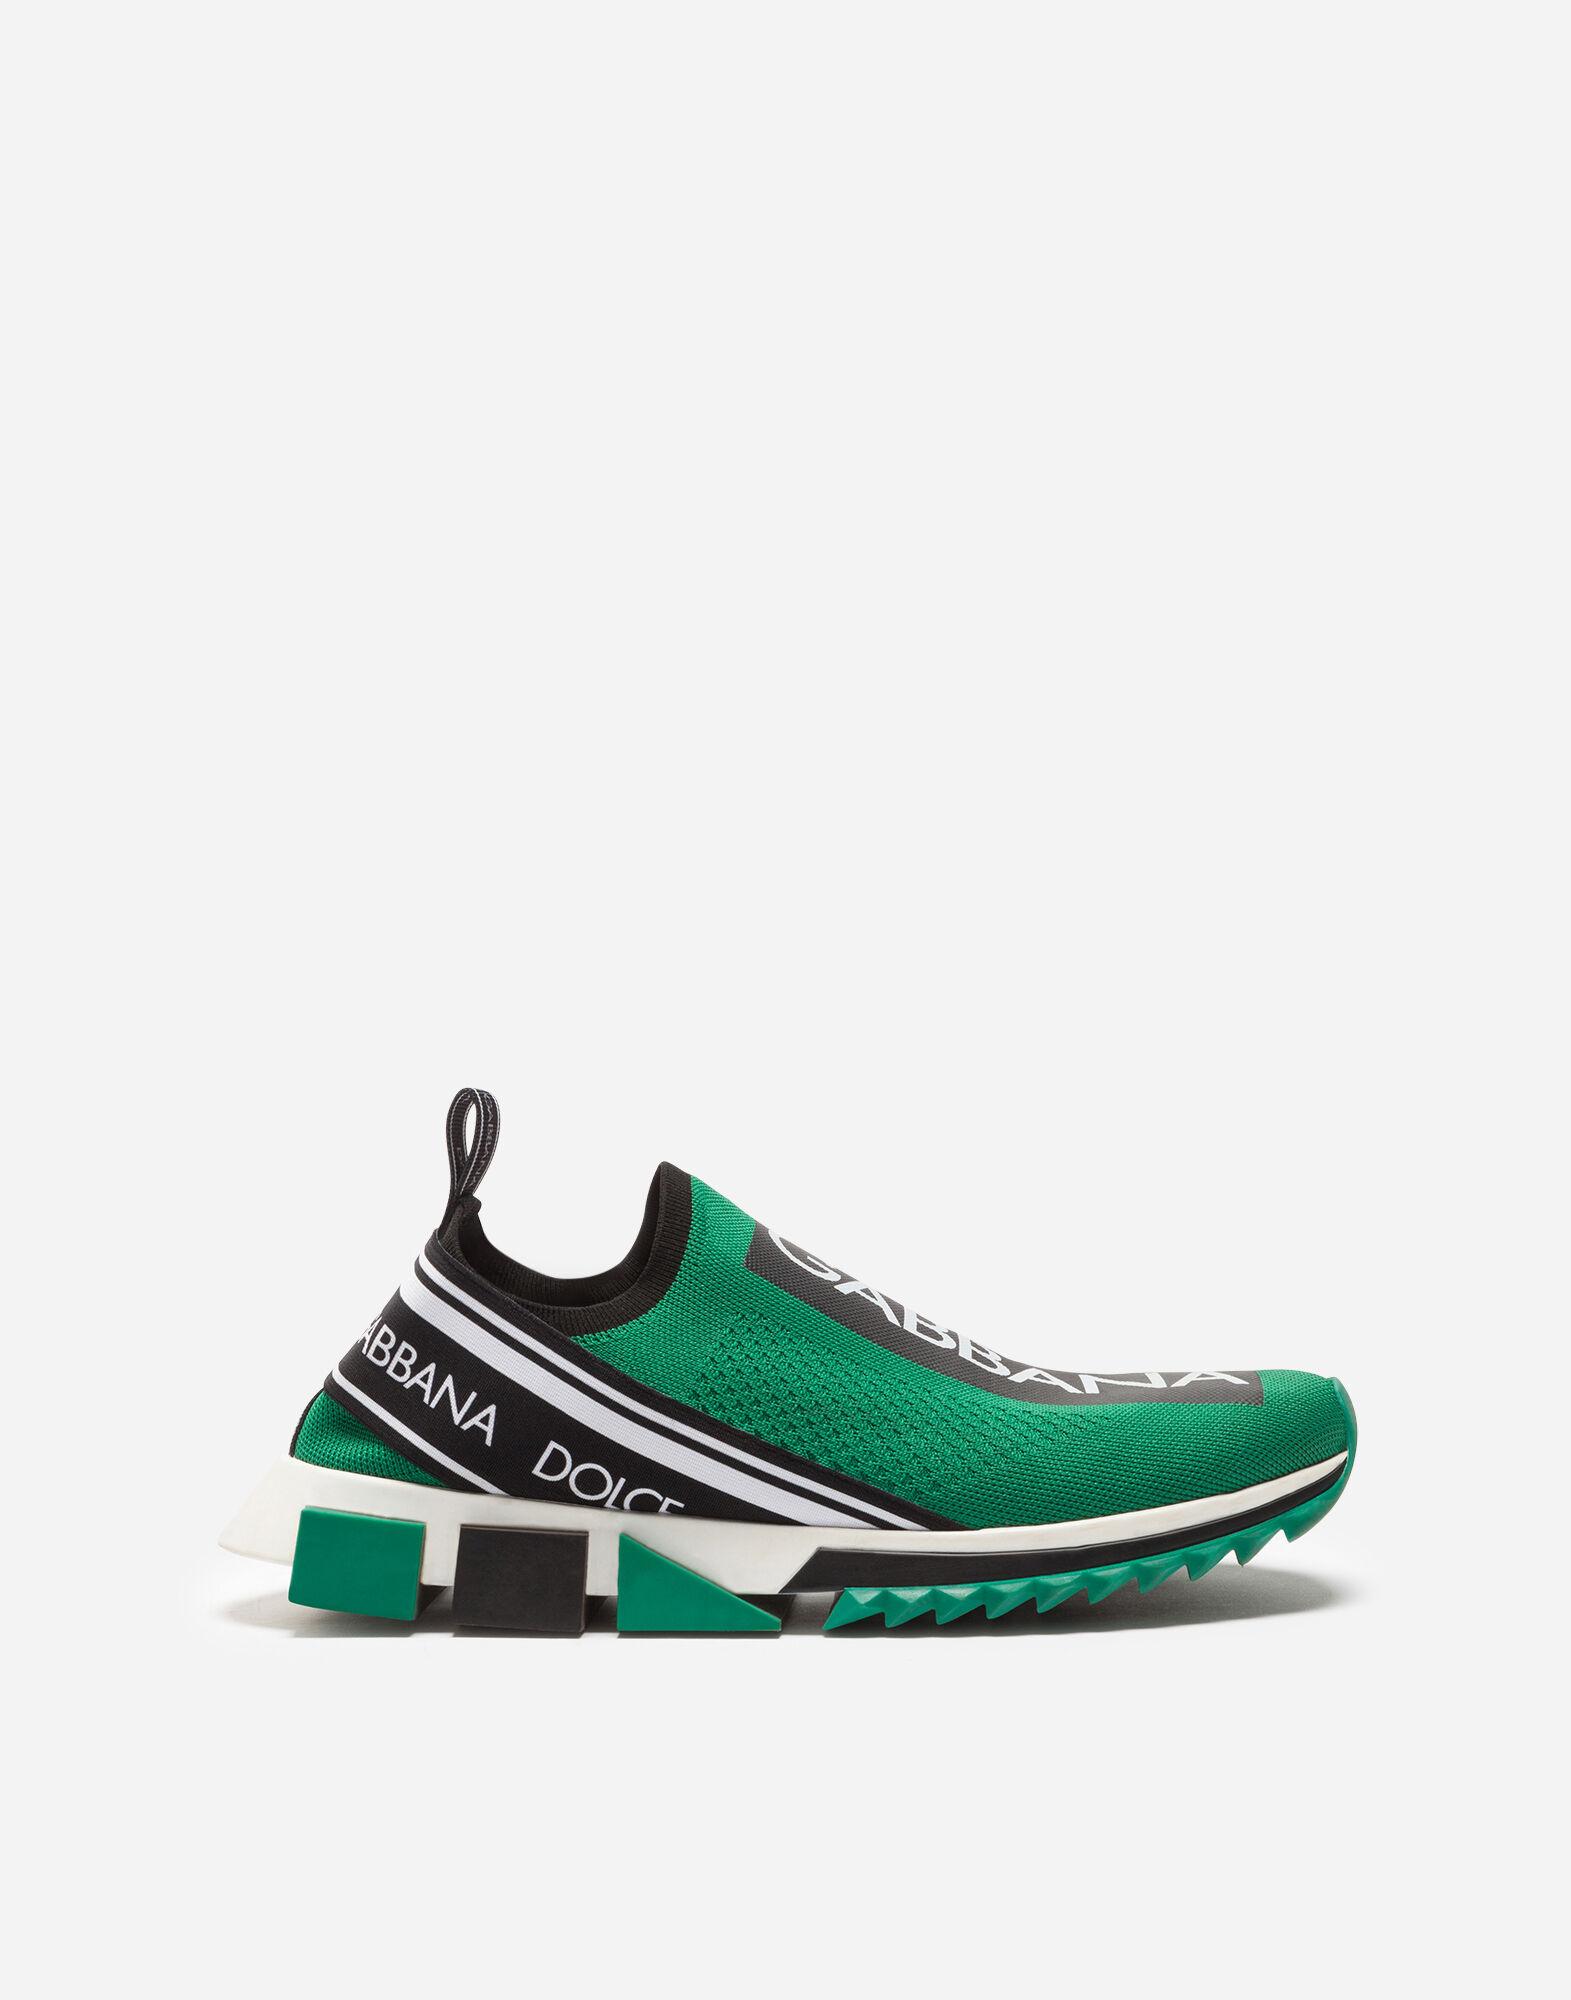 dolce and gabbana shoes green